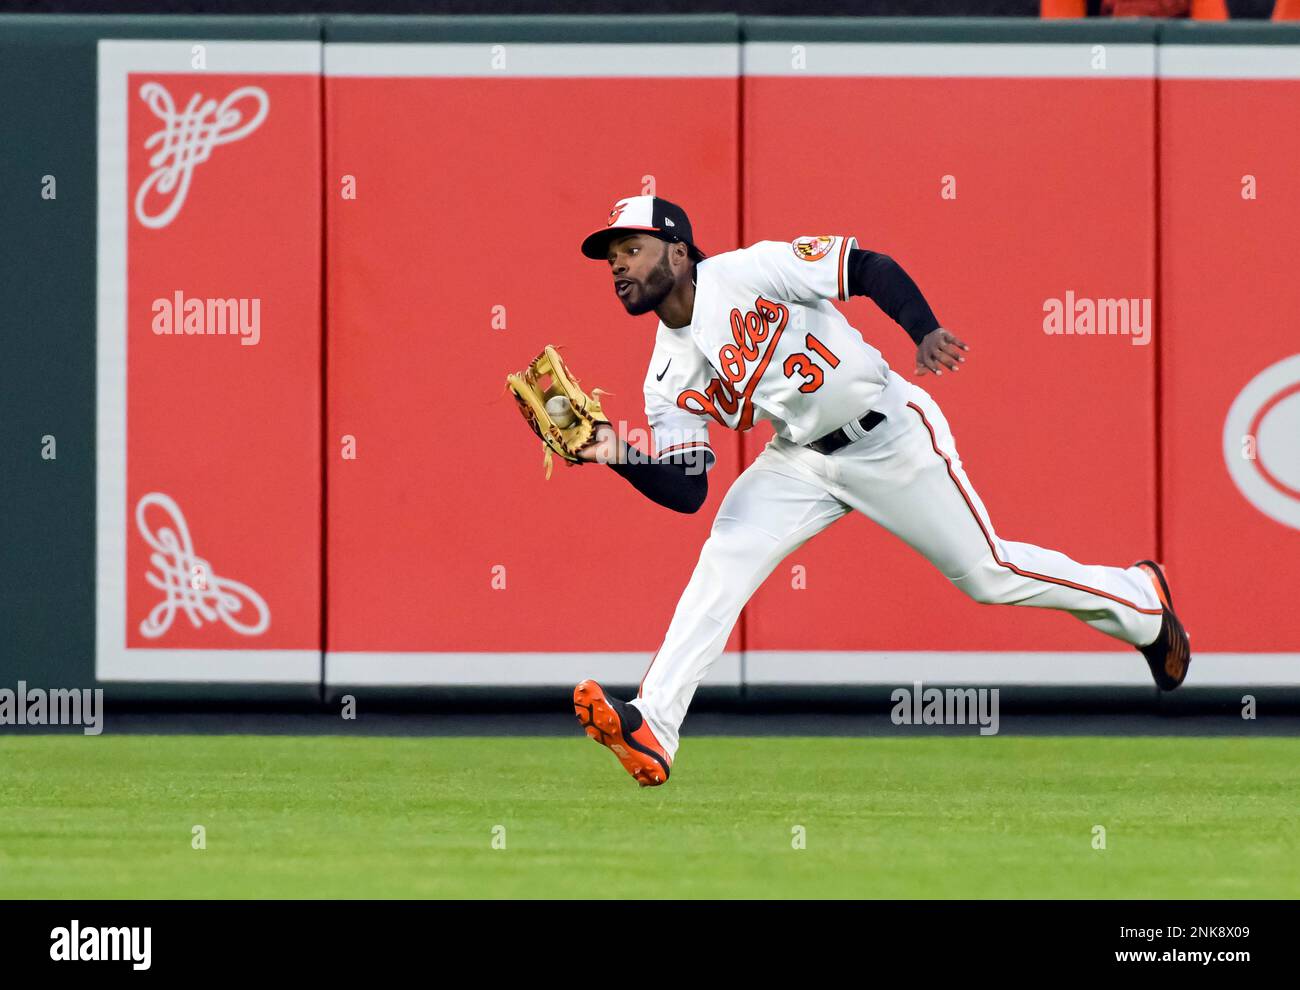 BALTIMORE, MD - MAY 03: Baltimore Orioles center fielder Cedric Mullins  (31) makes a running catch during the Minnesota Twins game versus the  Baltimore Orioles on May 3, 2022 at Orioles Park